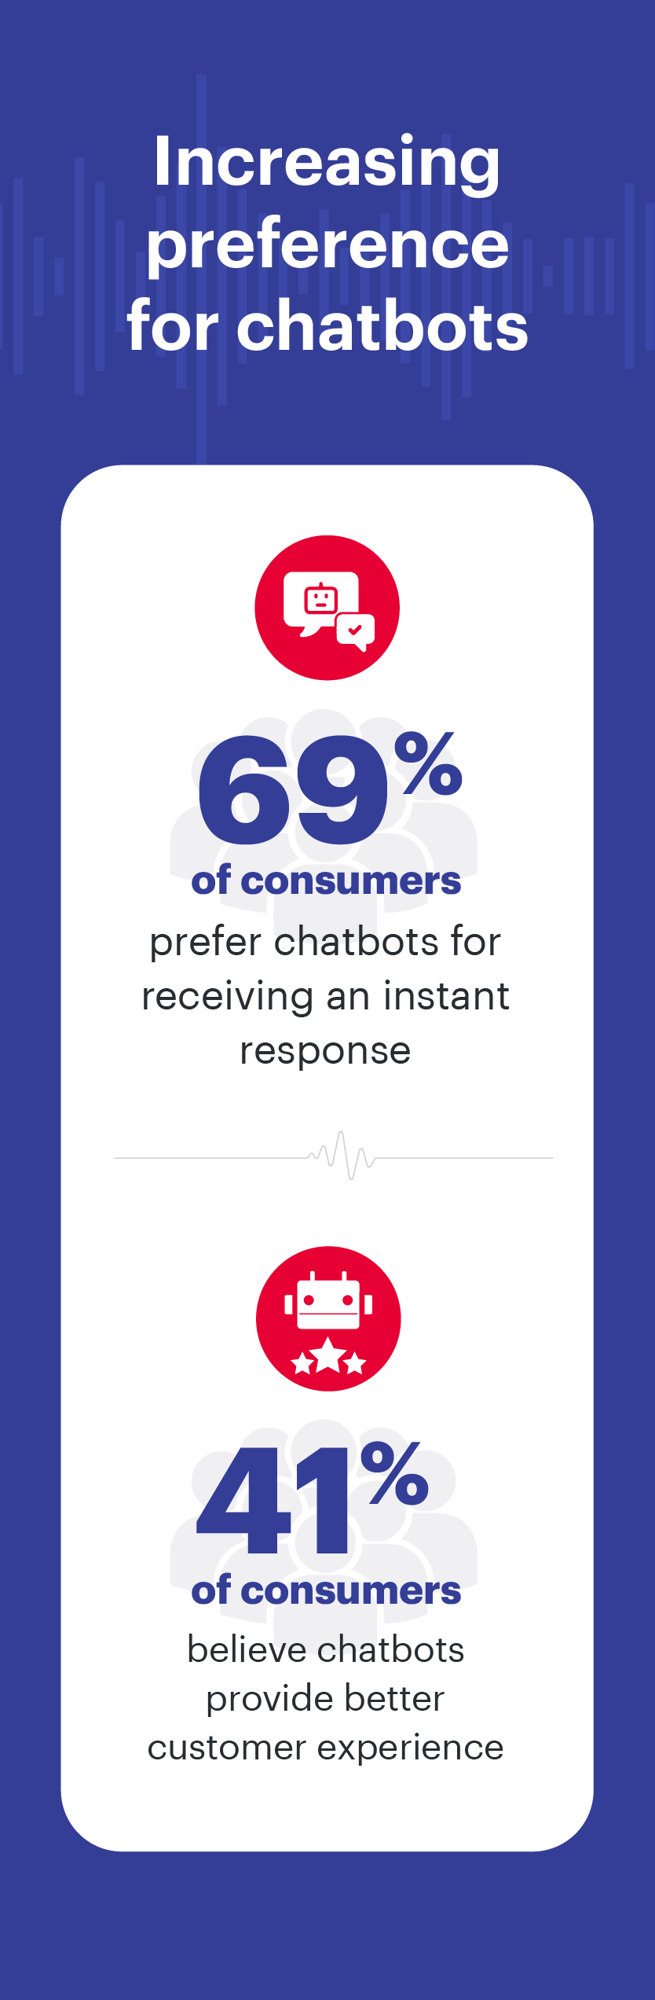 Increasing preference for chatbots